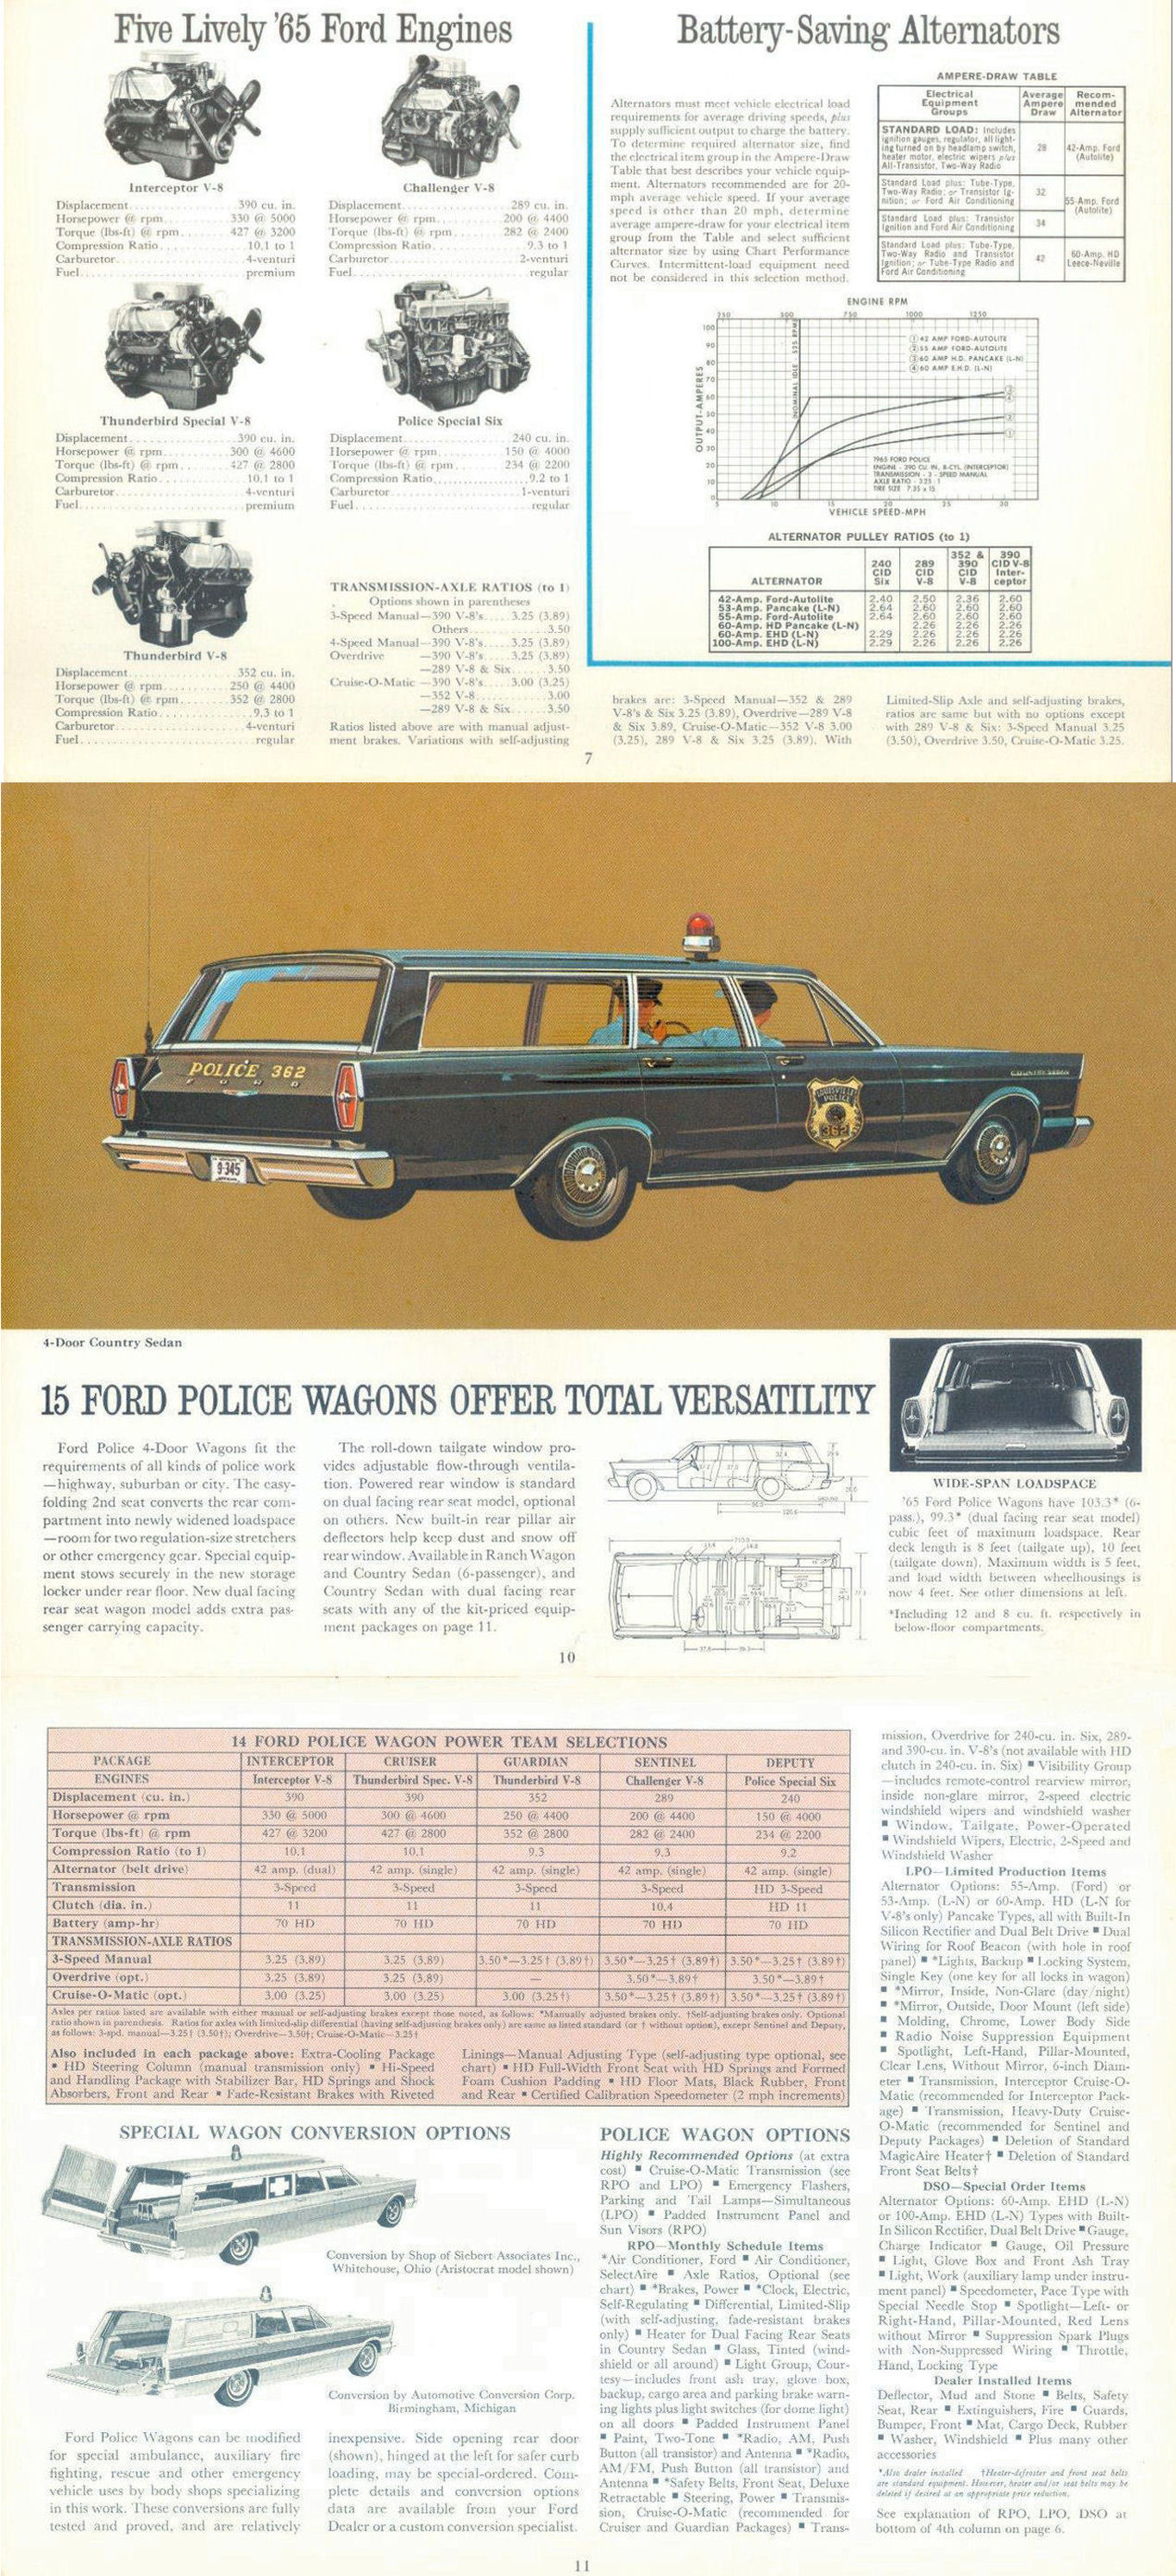 1965_Ford_Police_Cars-07-10-11